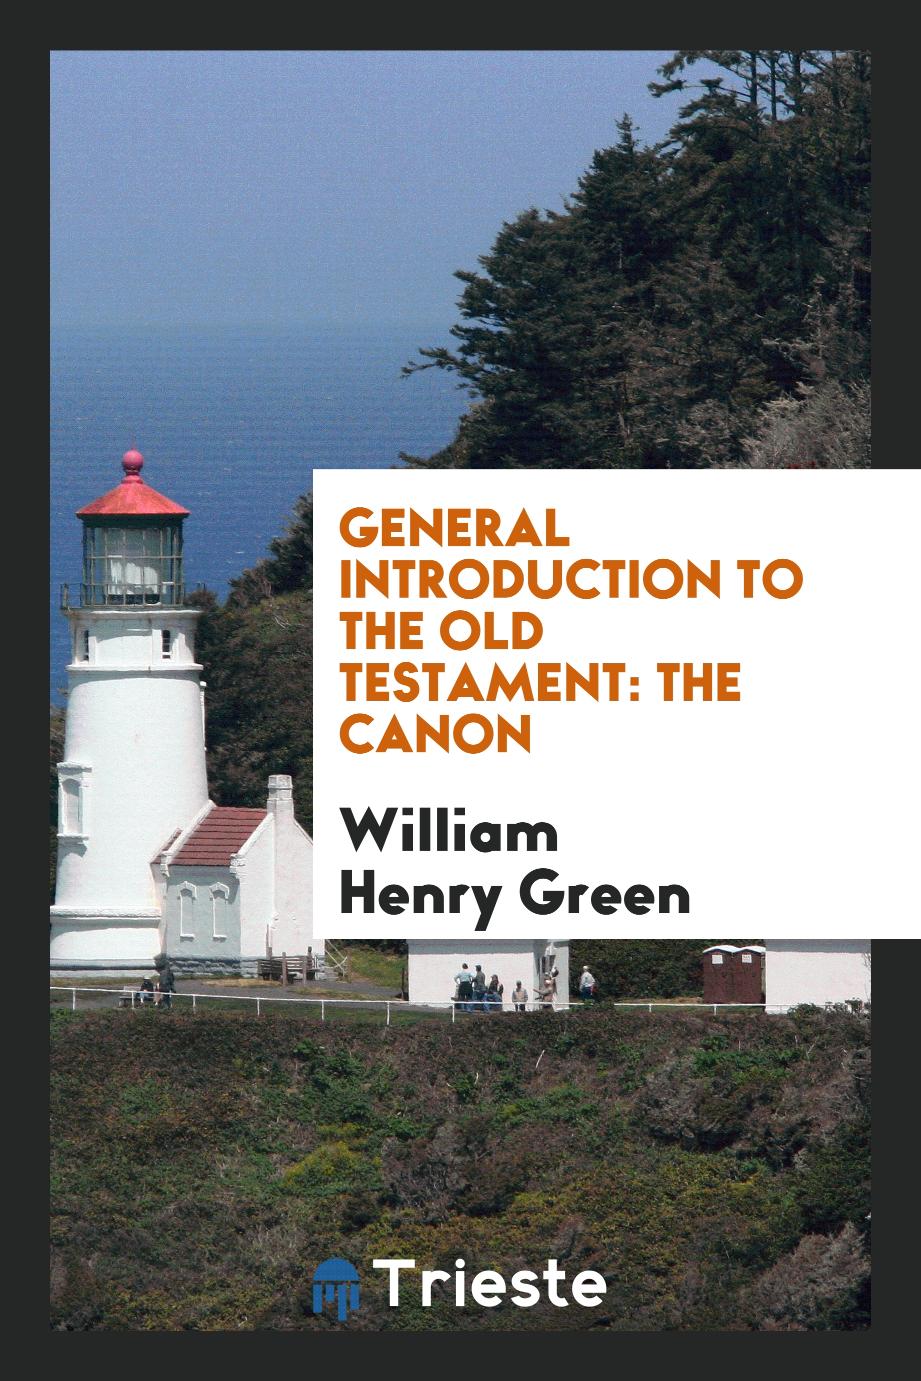 General introduction to the Old Testament: the canon